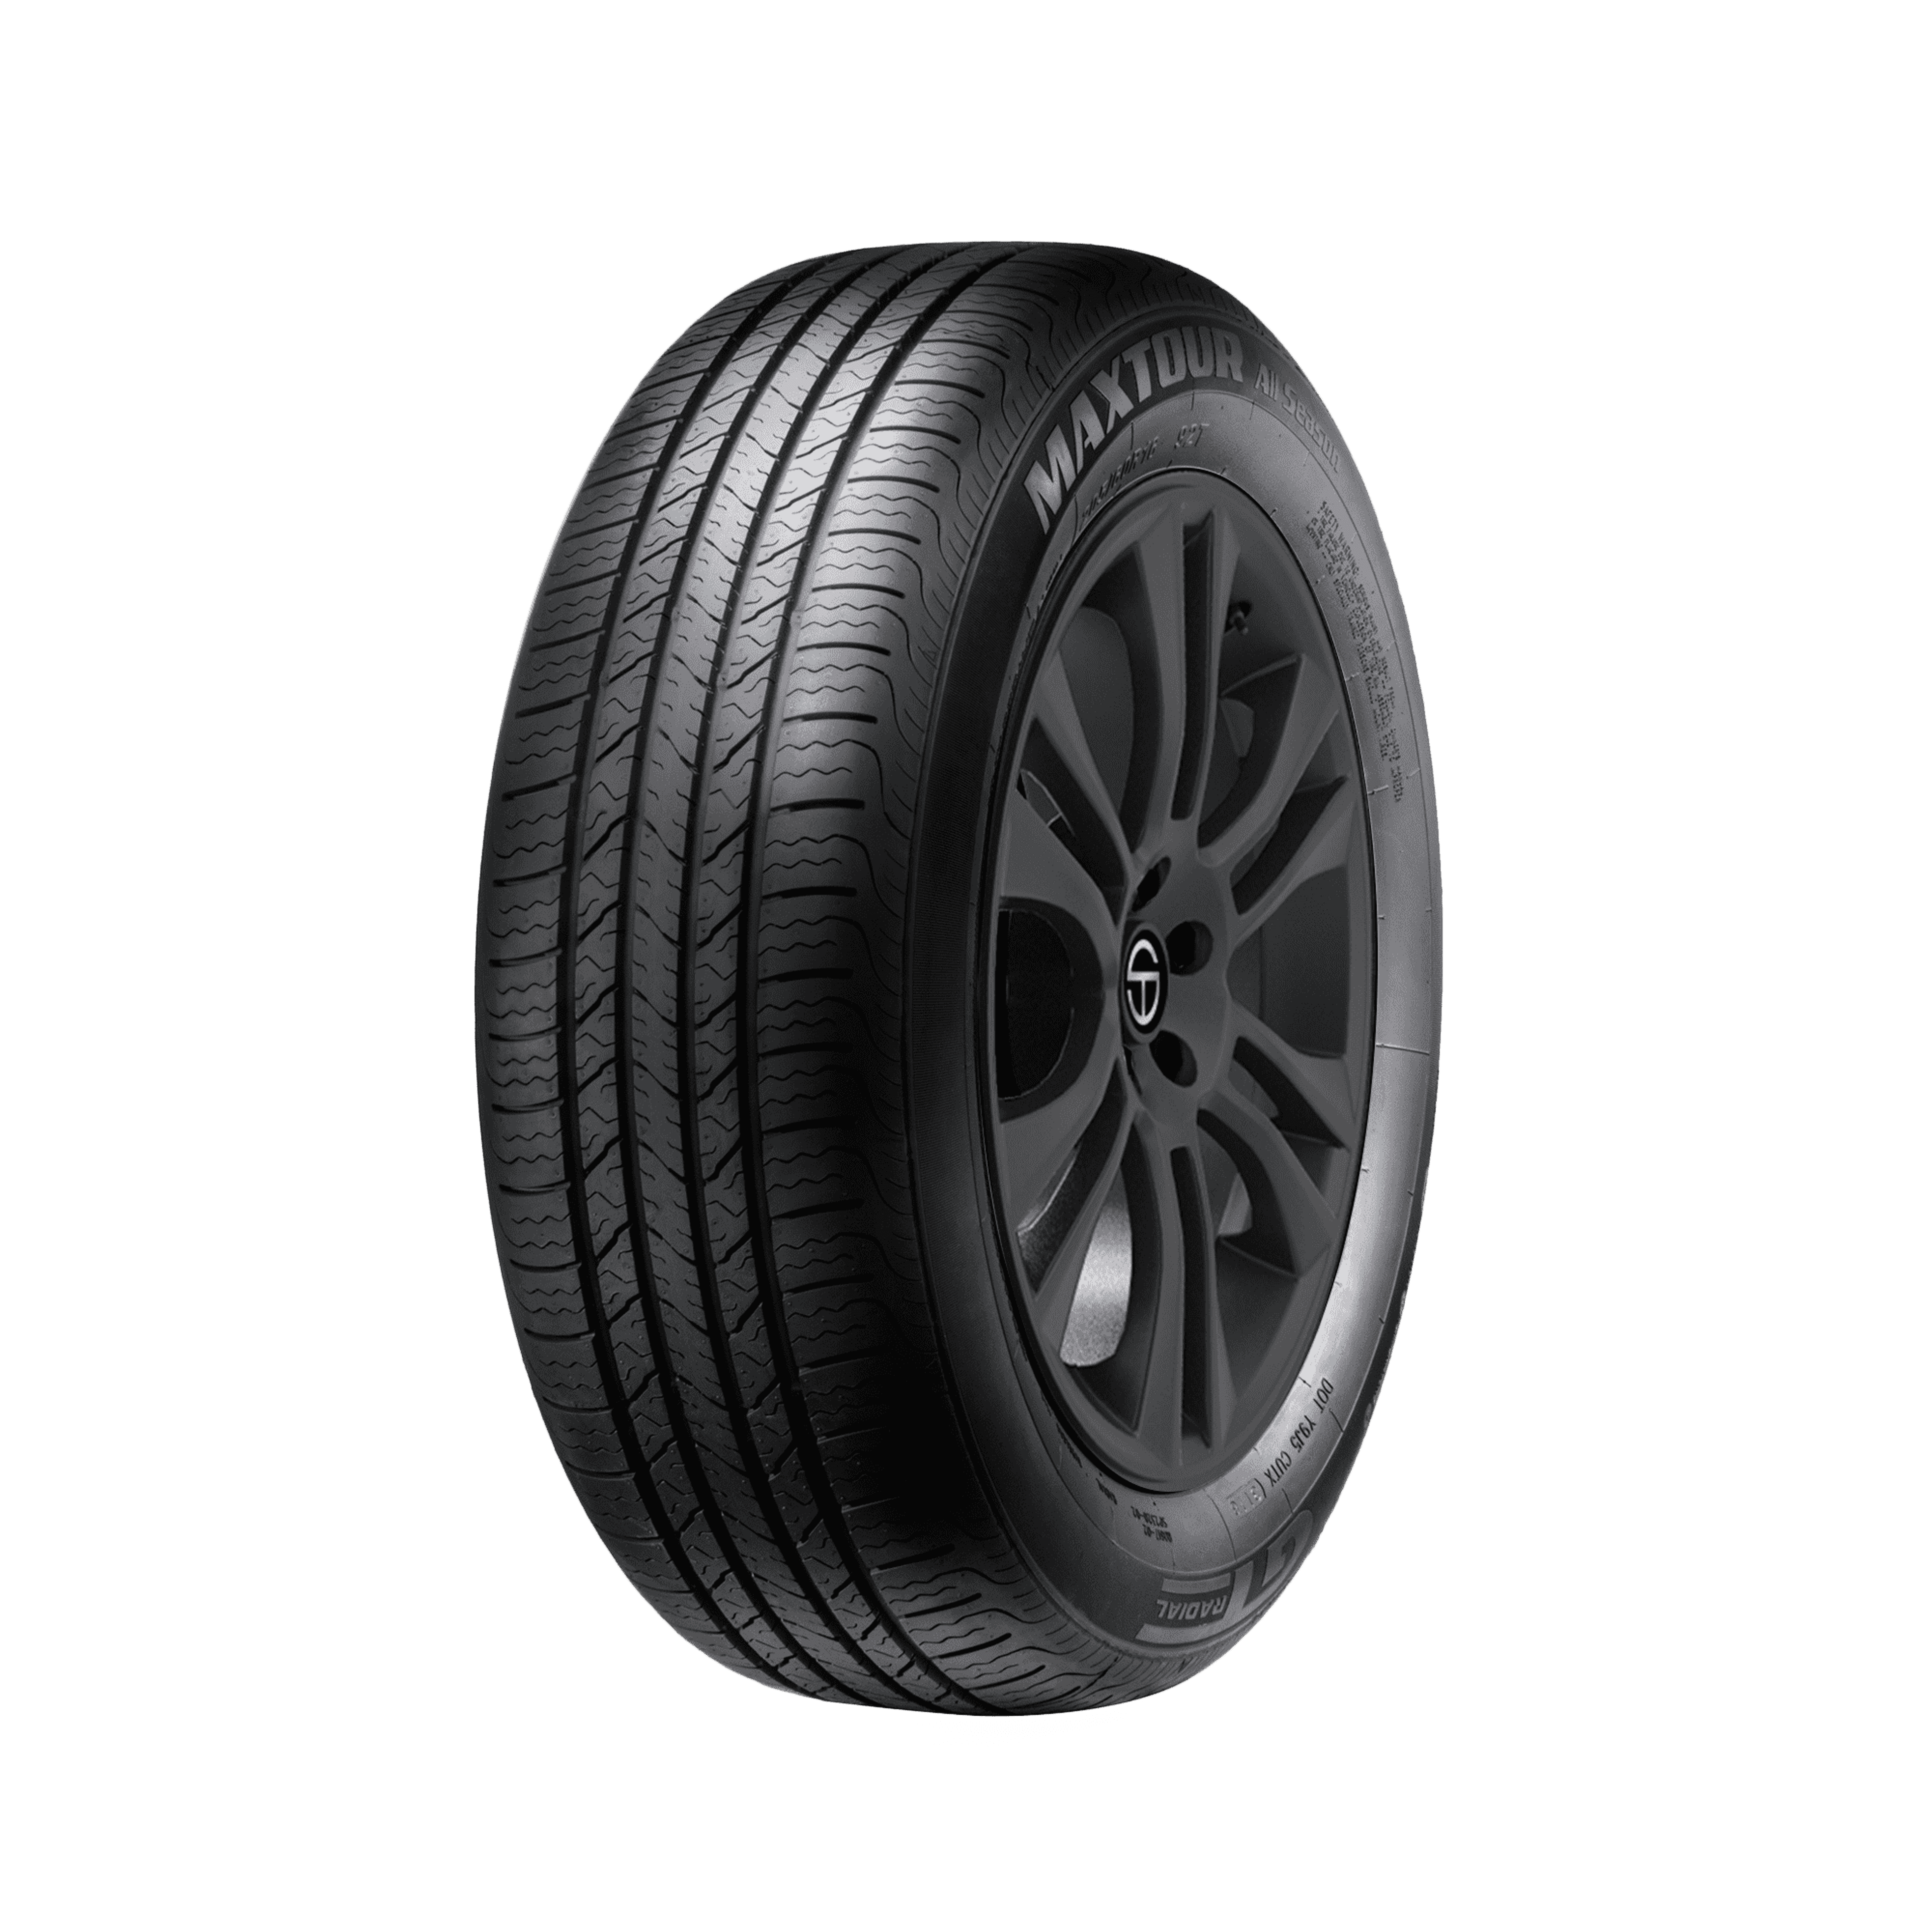 Buy GT Radial Maxtour All Season Tires Online | SimpleTire